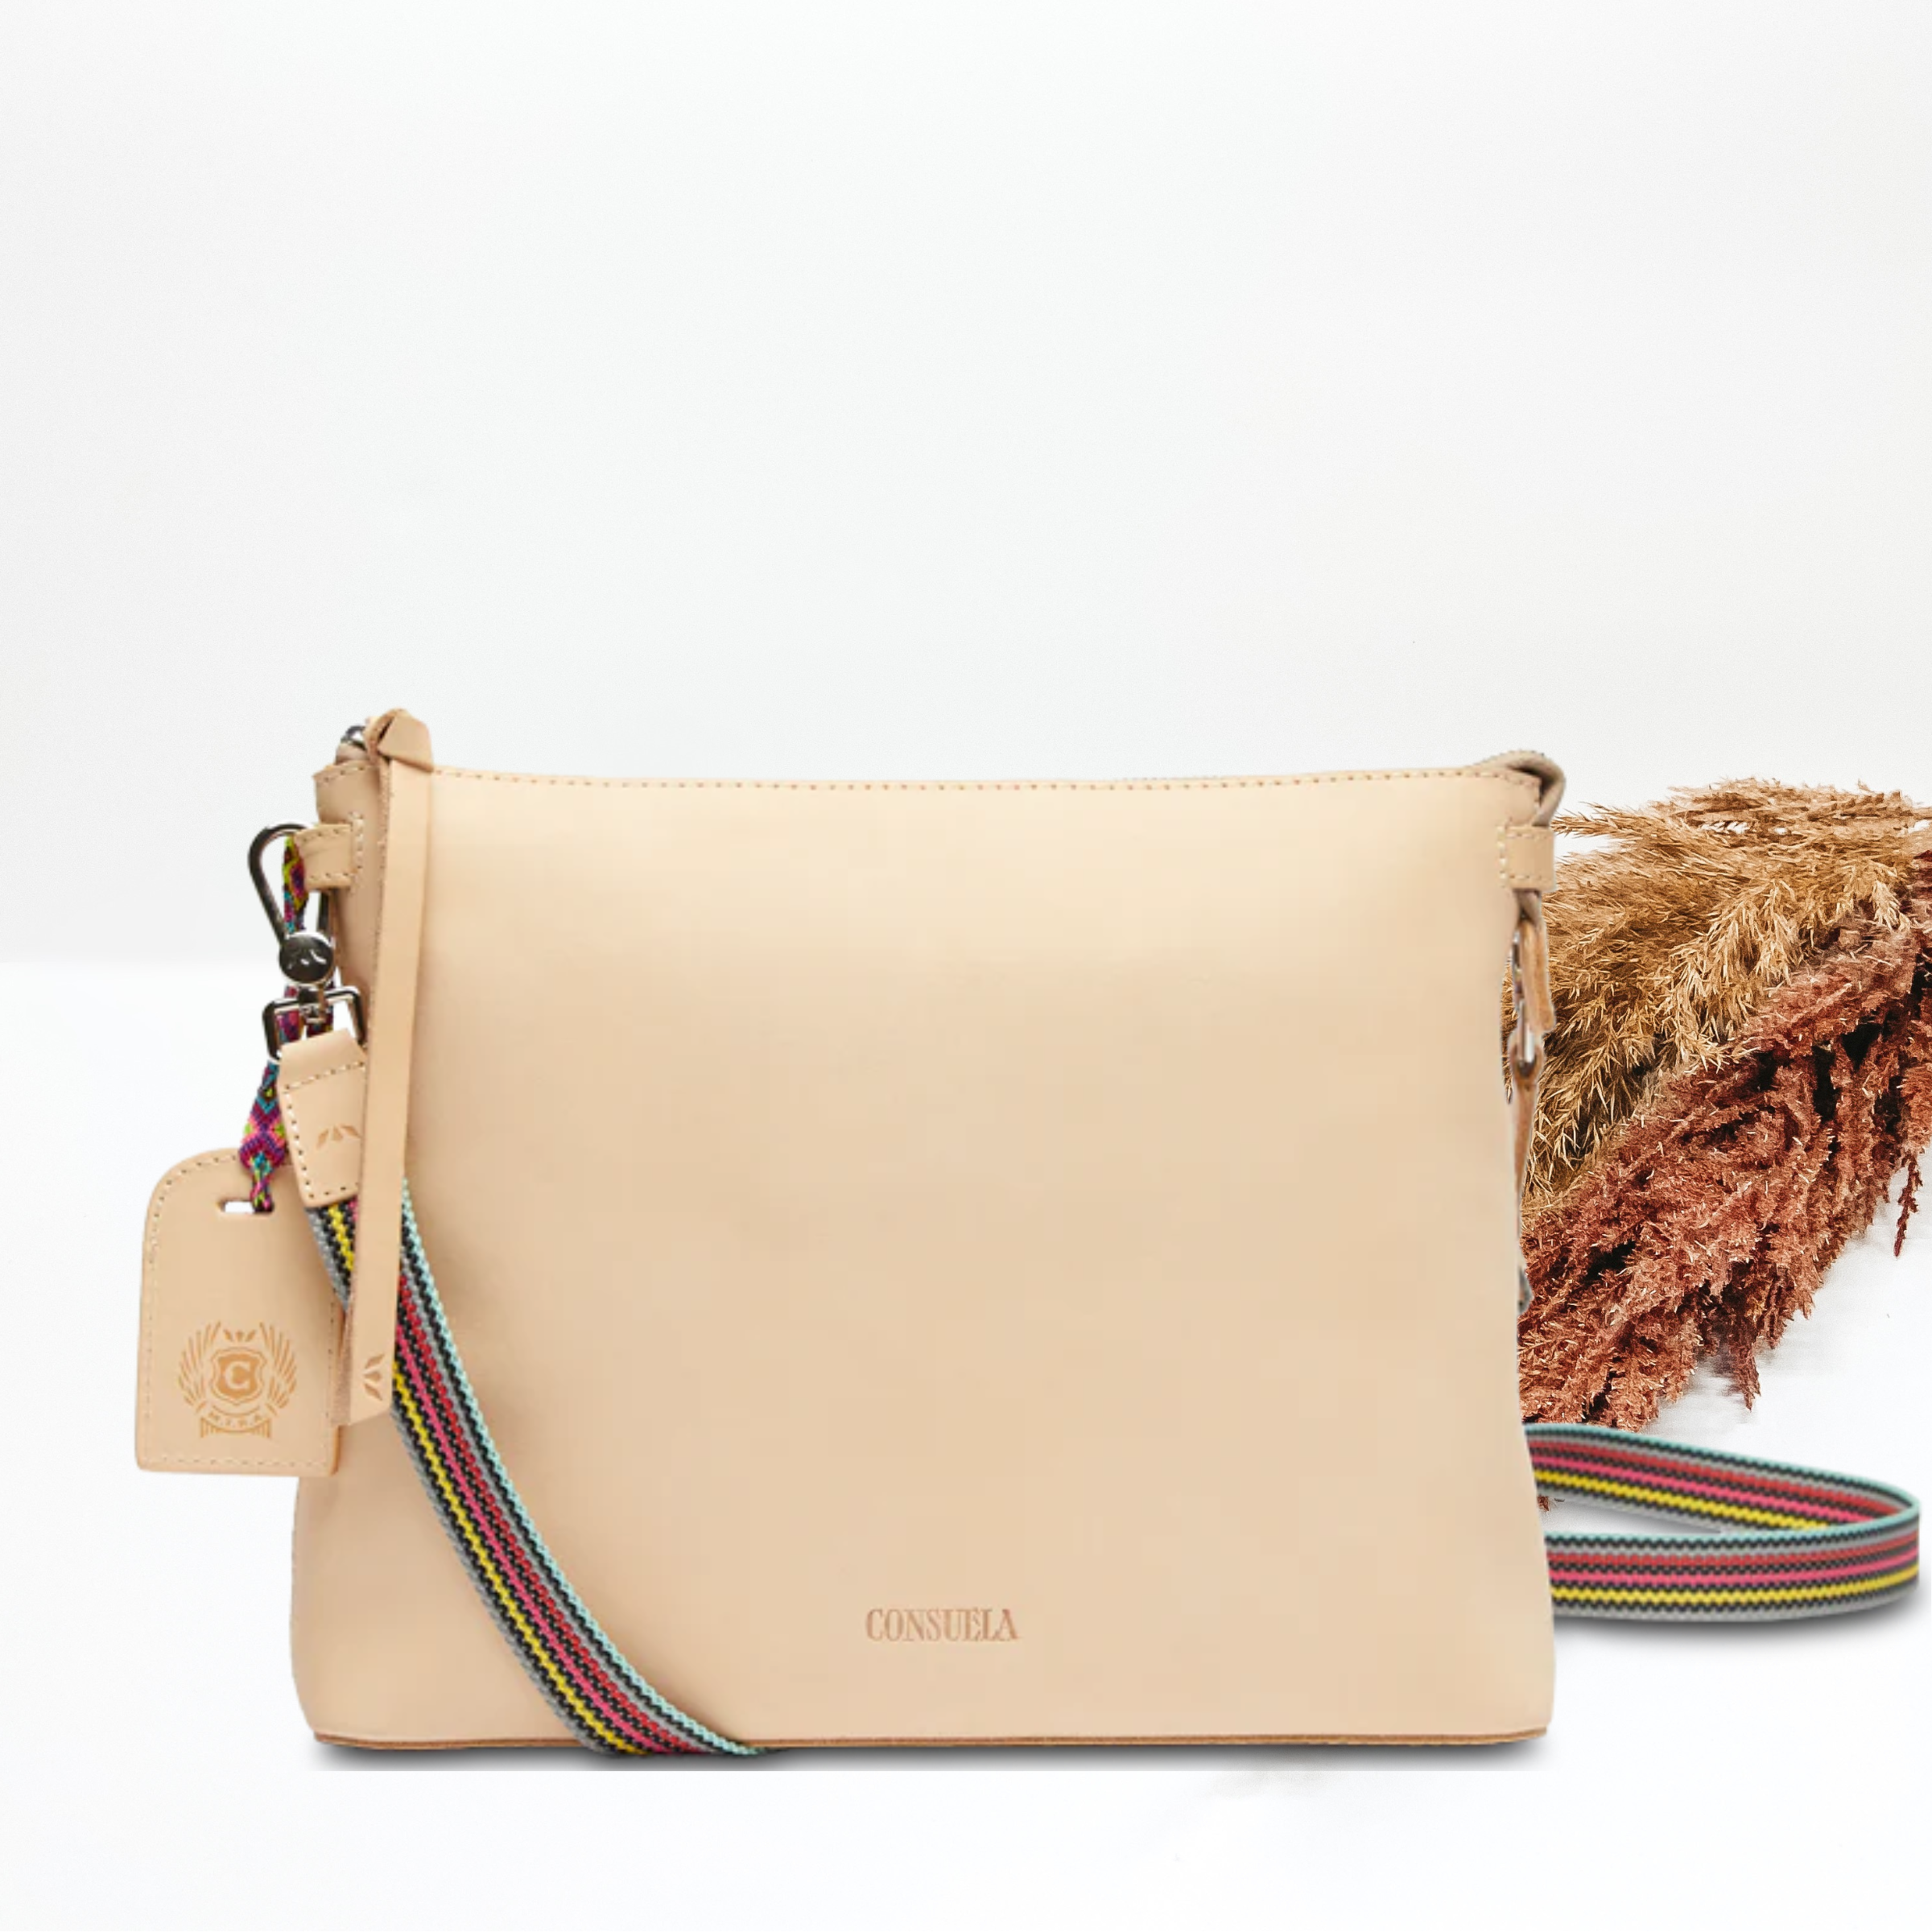 A light leather crossbody bag with a colorful strap. Pictured on white background with brown pompous grass on the right side.